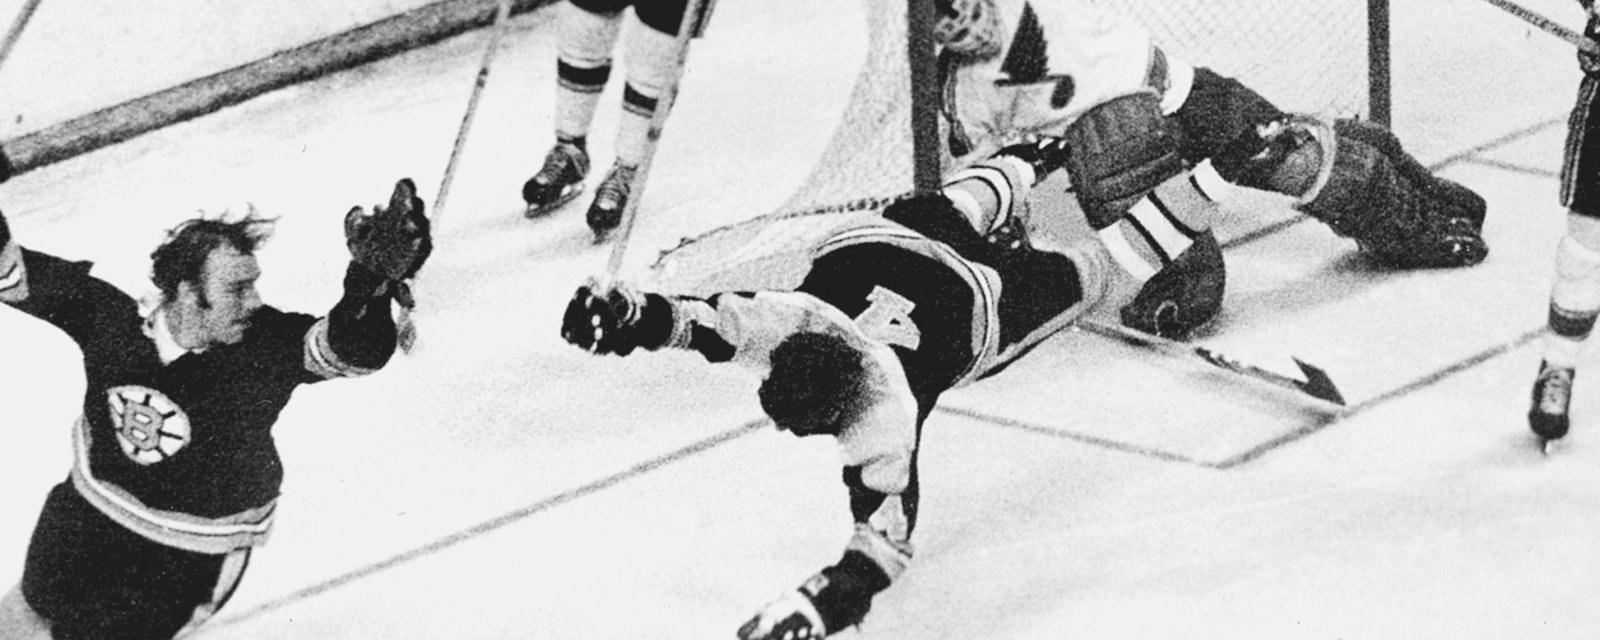 On this day, 47 years ago, Bobby Orr made history.